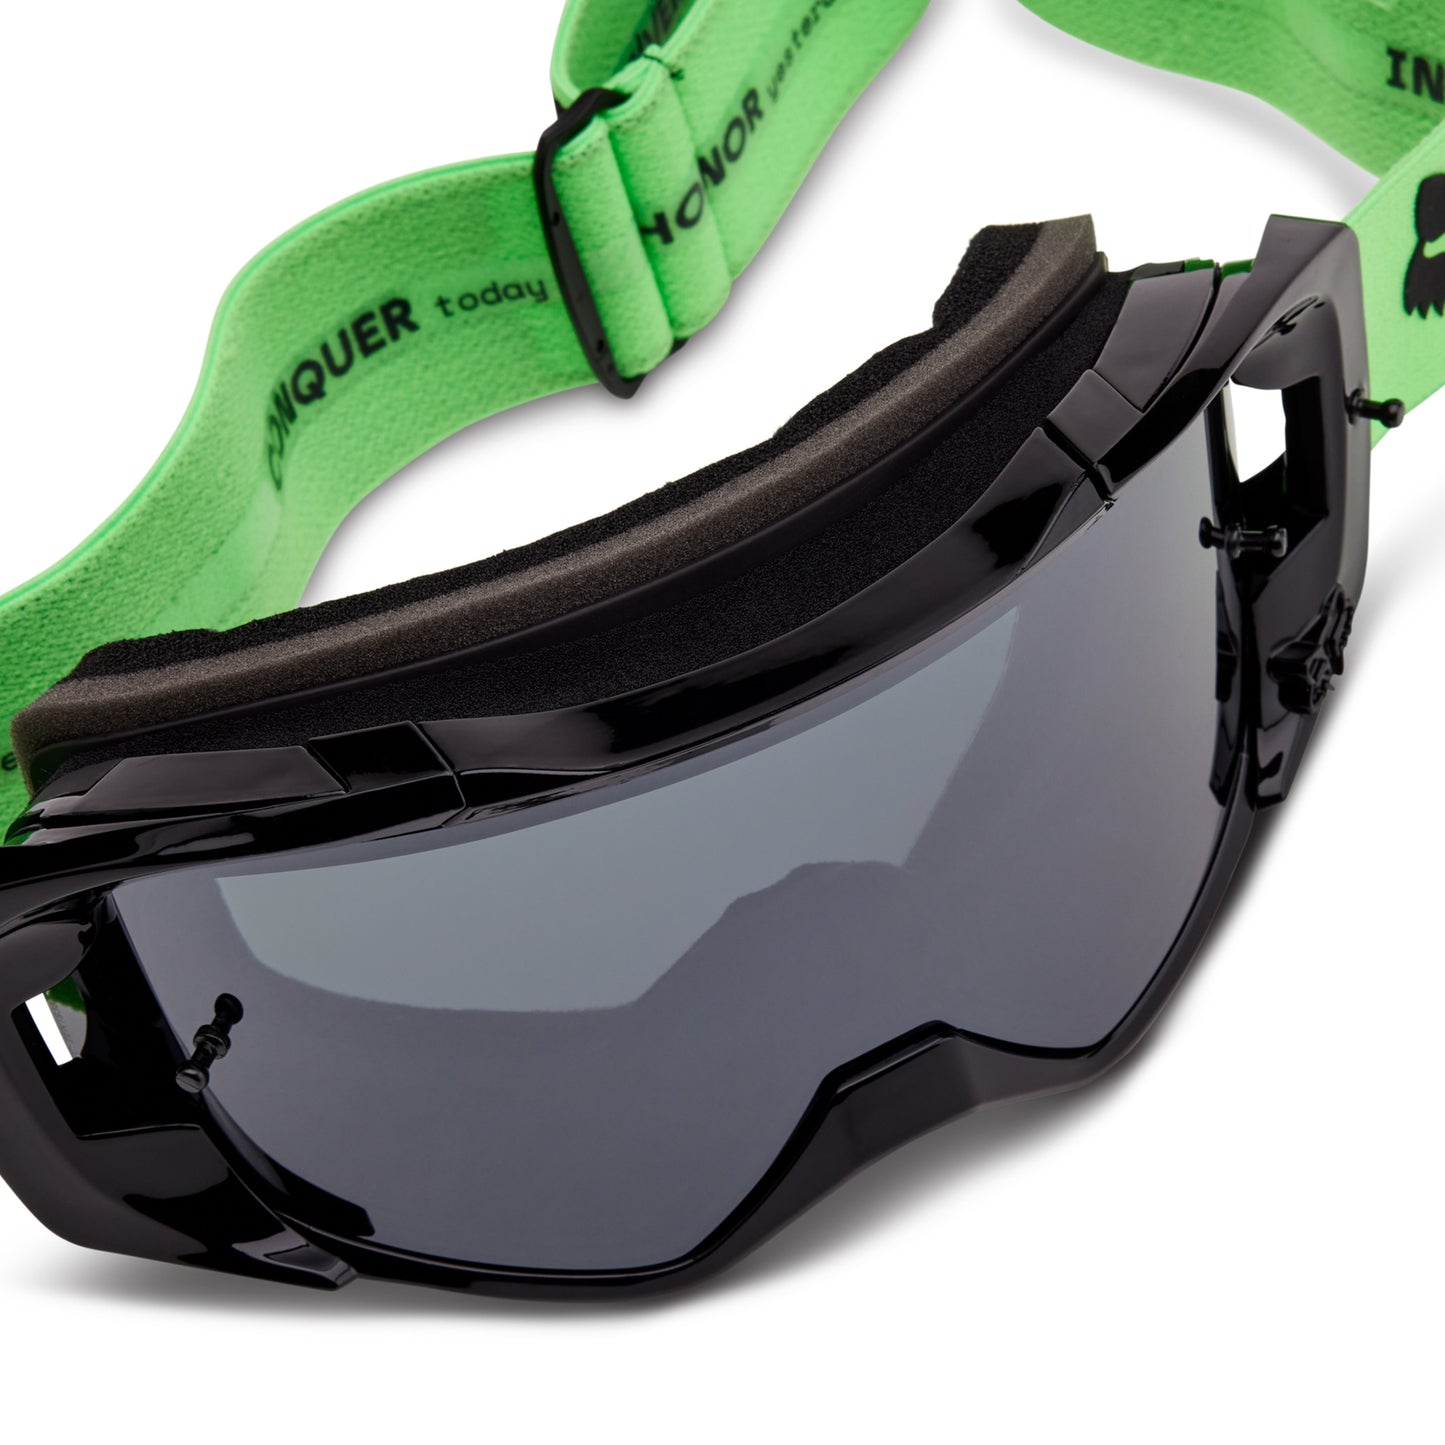 Fox Vue 50th Limited Edition Goggles - Spark Injected Lens (Fluorescent Green)